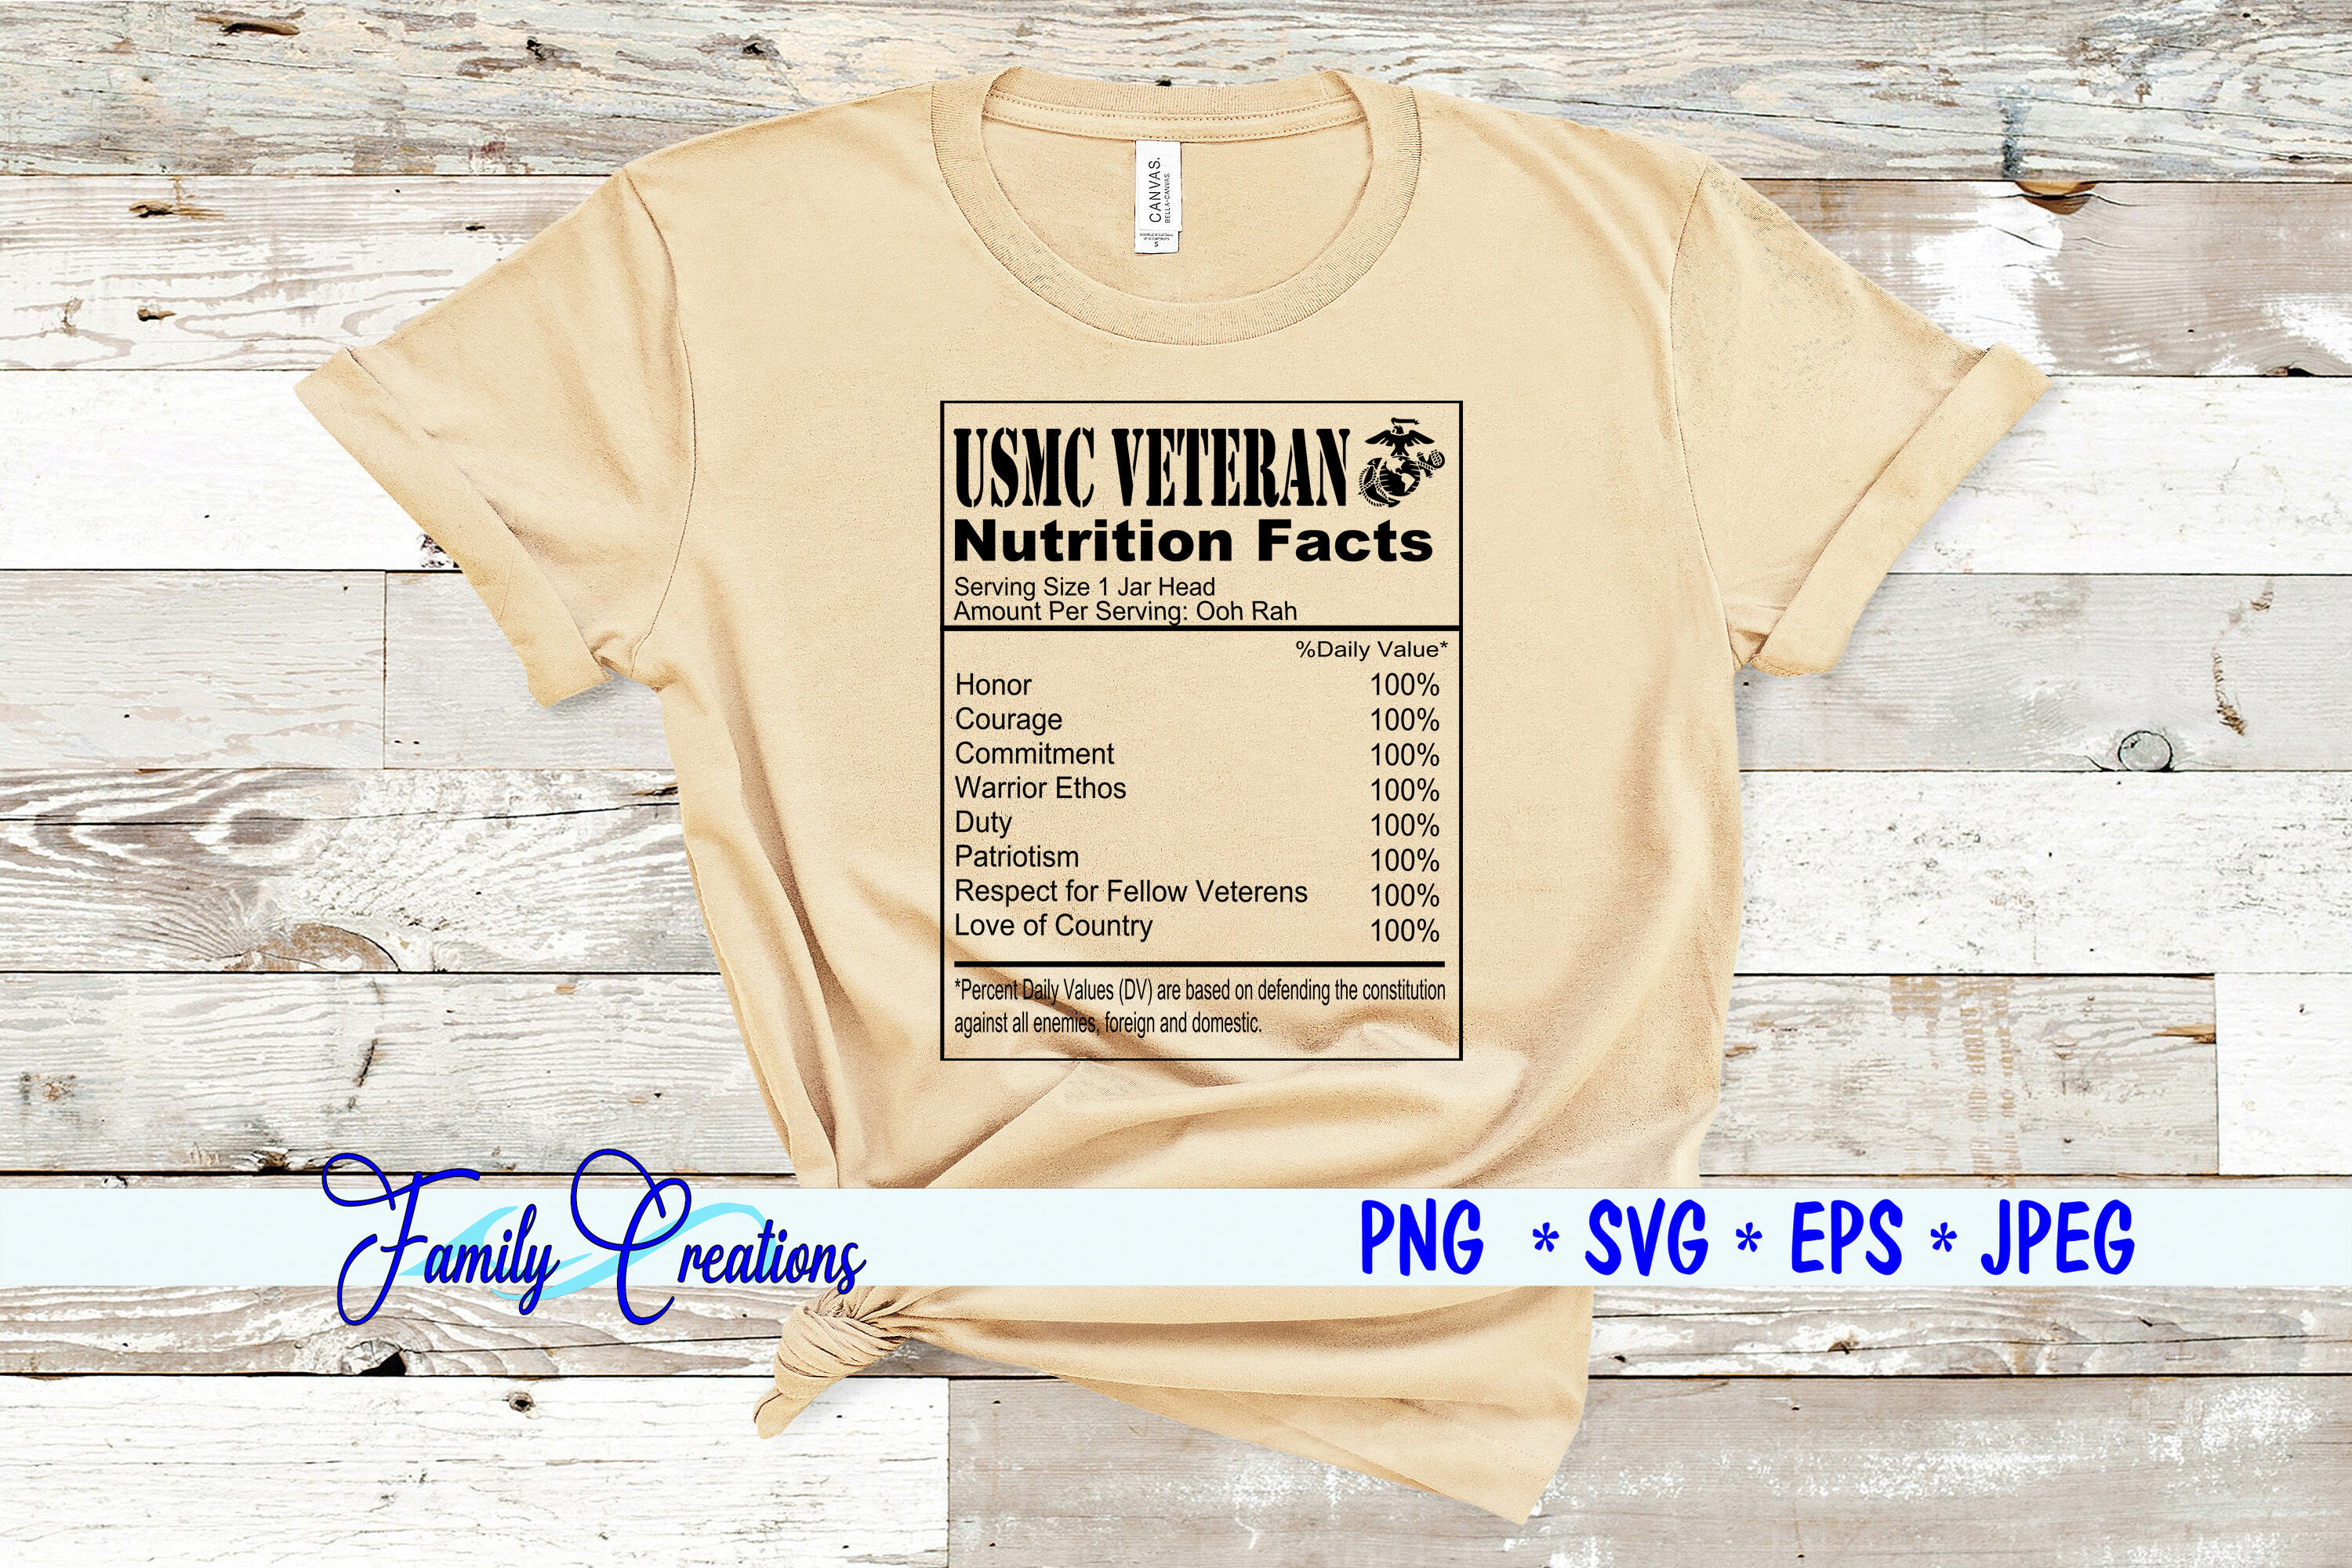 Download Usmc Veteran Nutrition Facts By Family Creations Thehungryjpeg Com